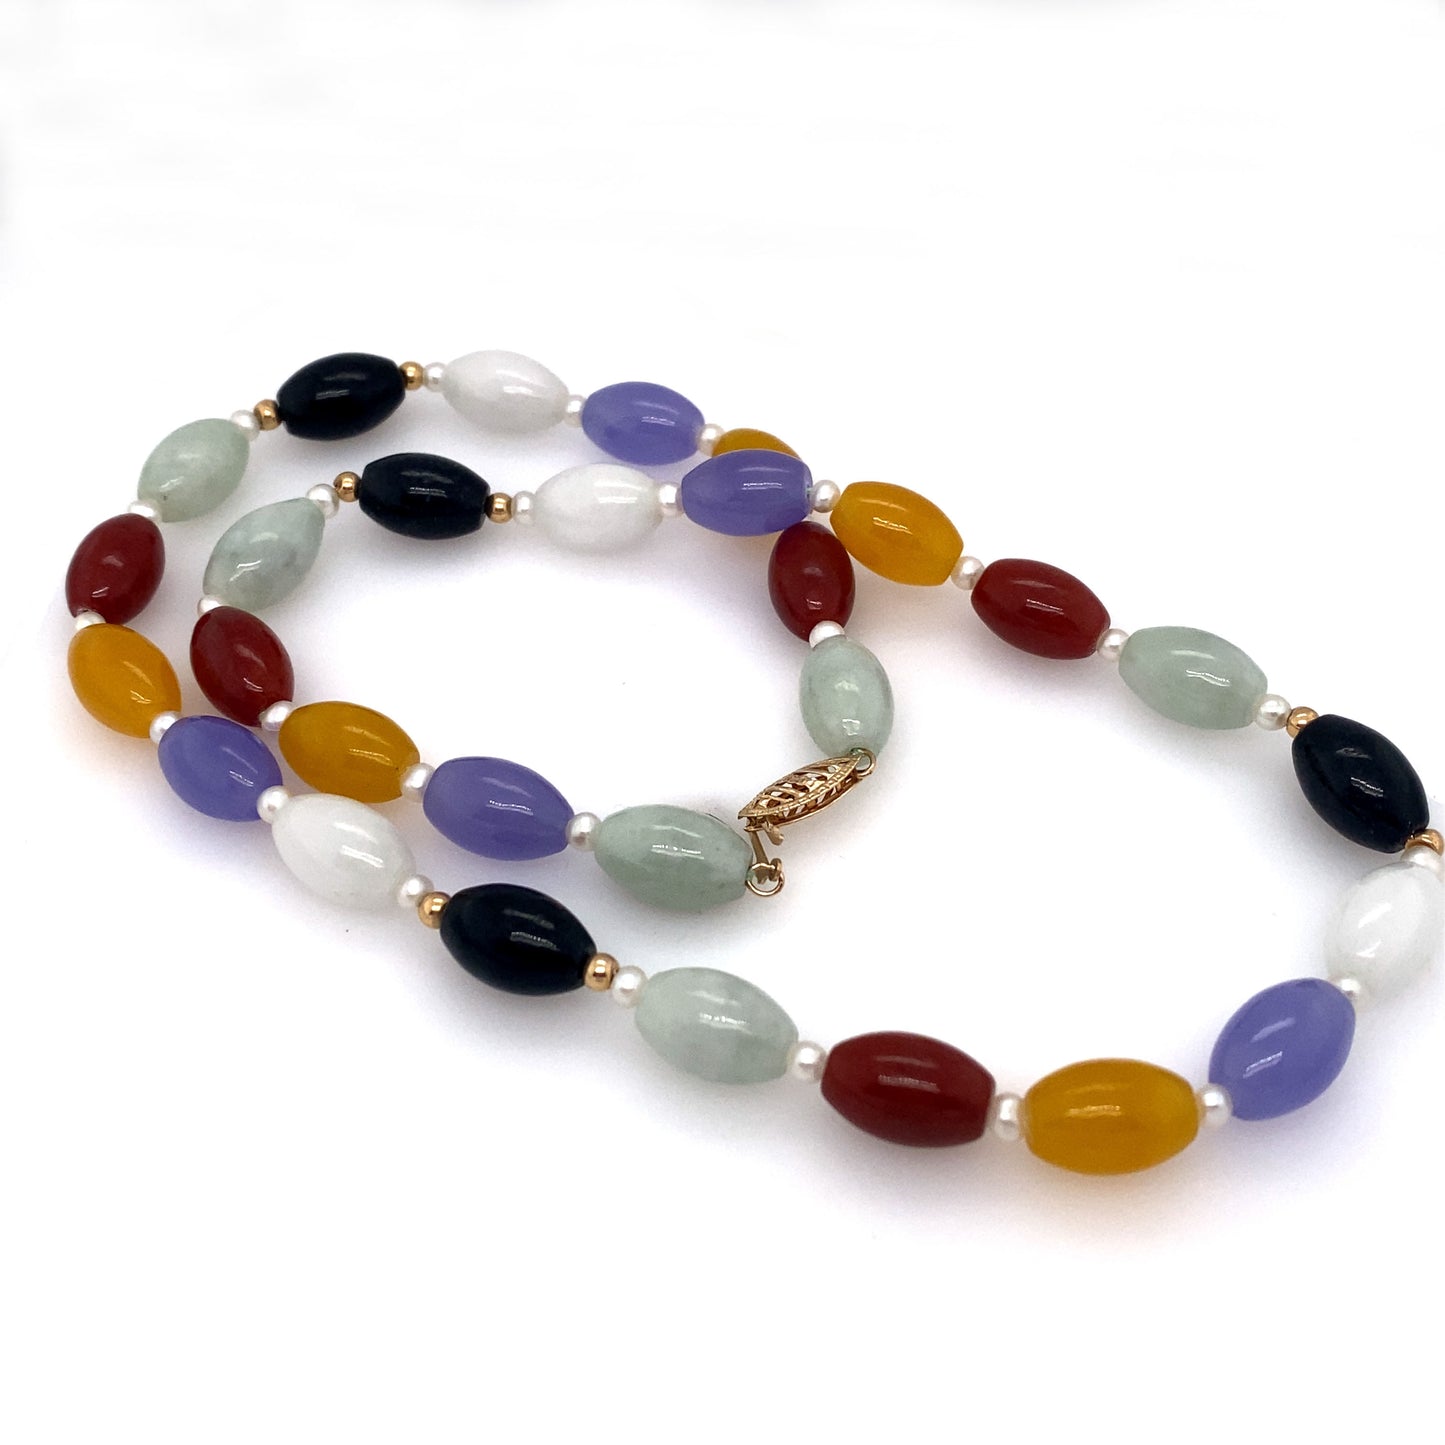 Circa 1950s Multicolored Jade Beaded Necklace with Pearls in 14K Gold